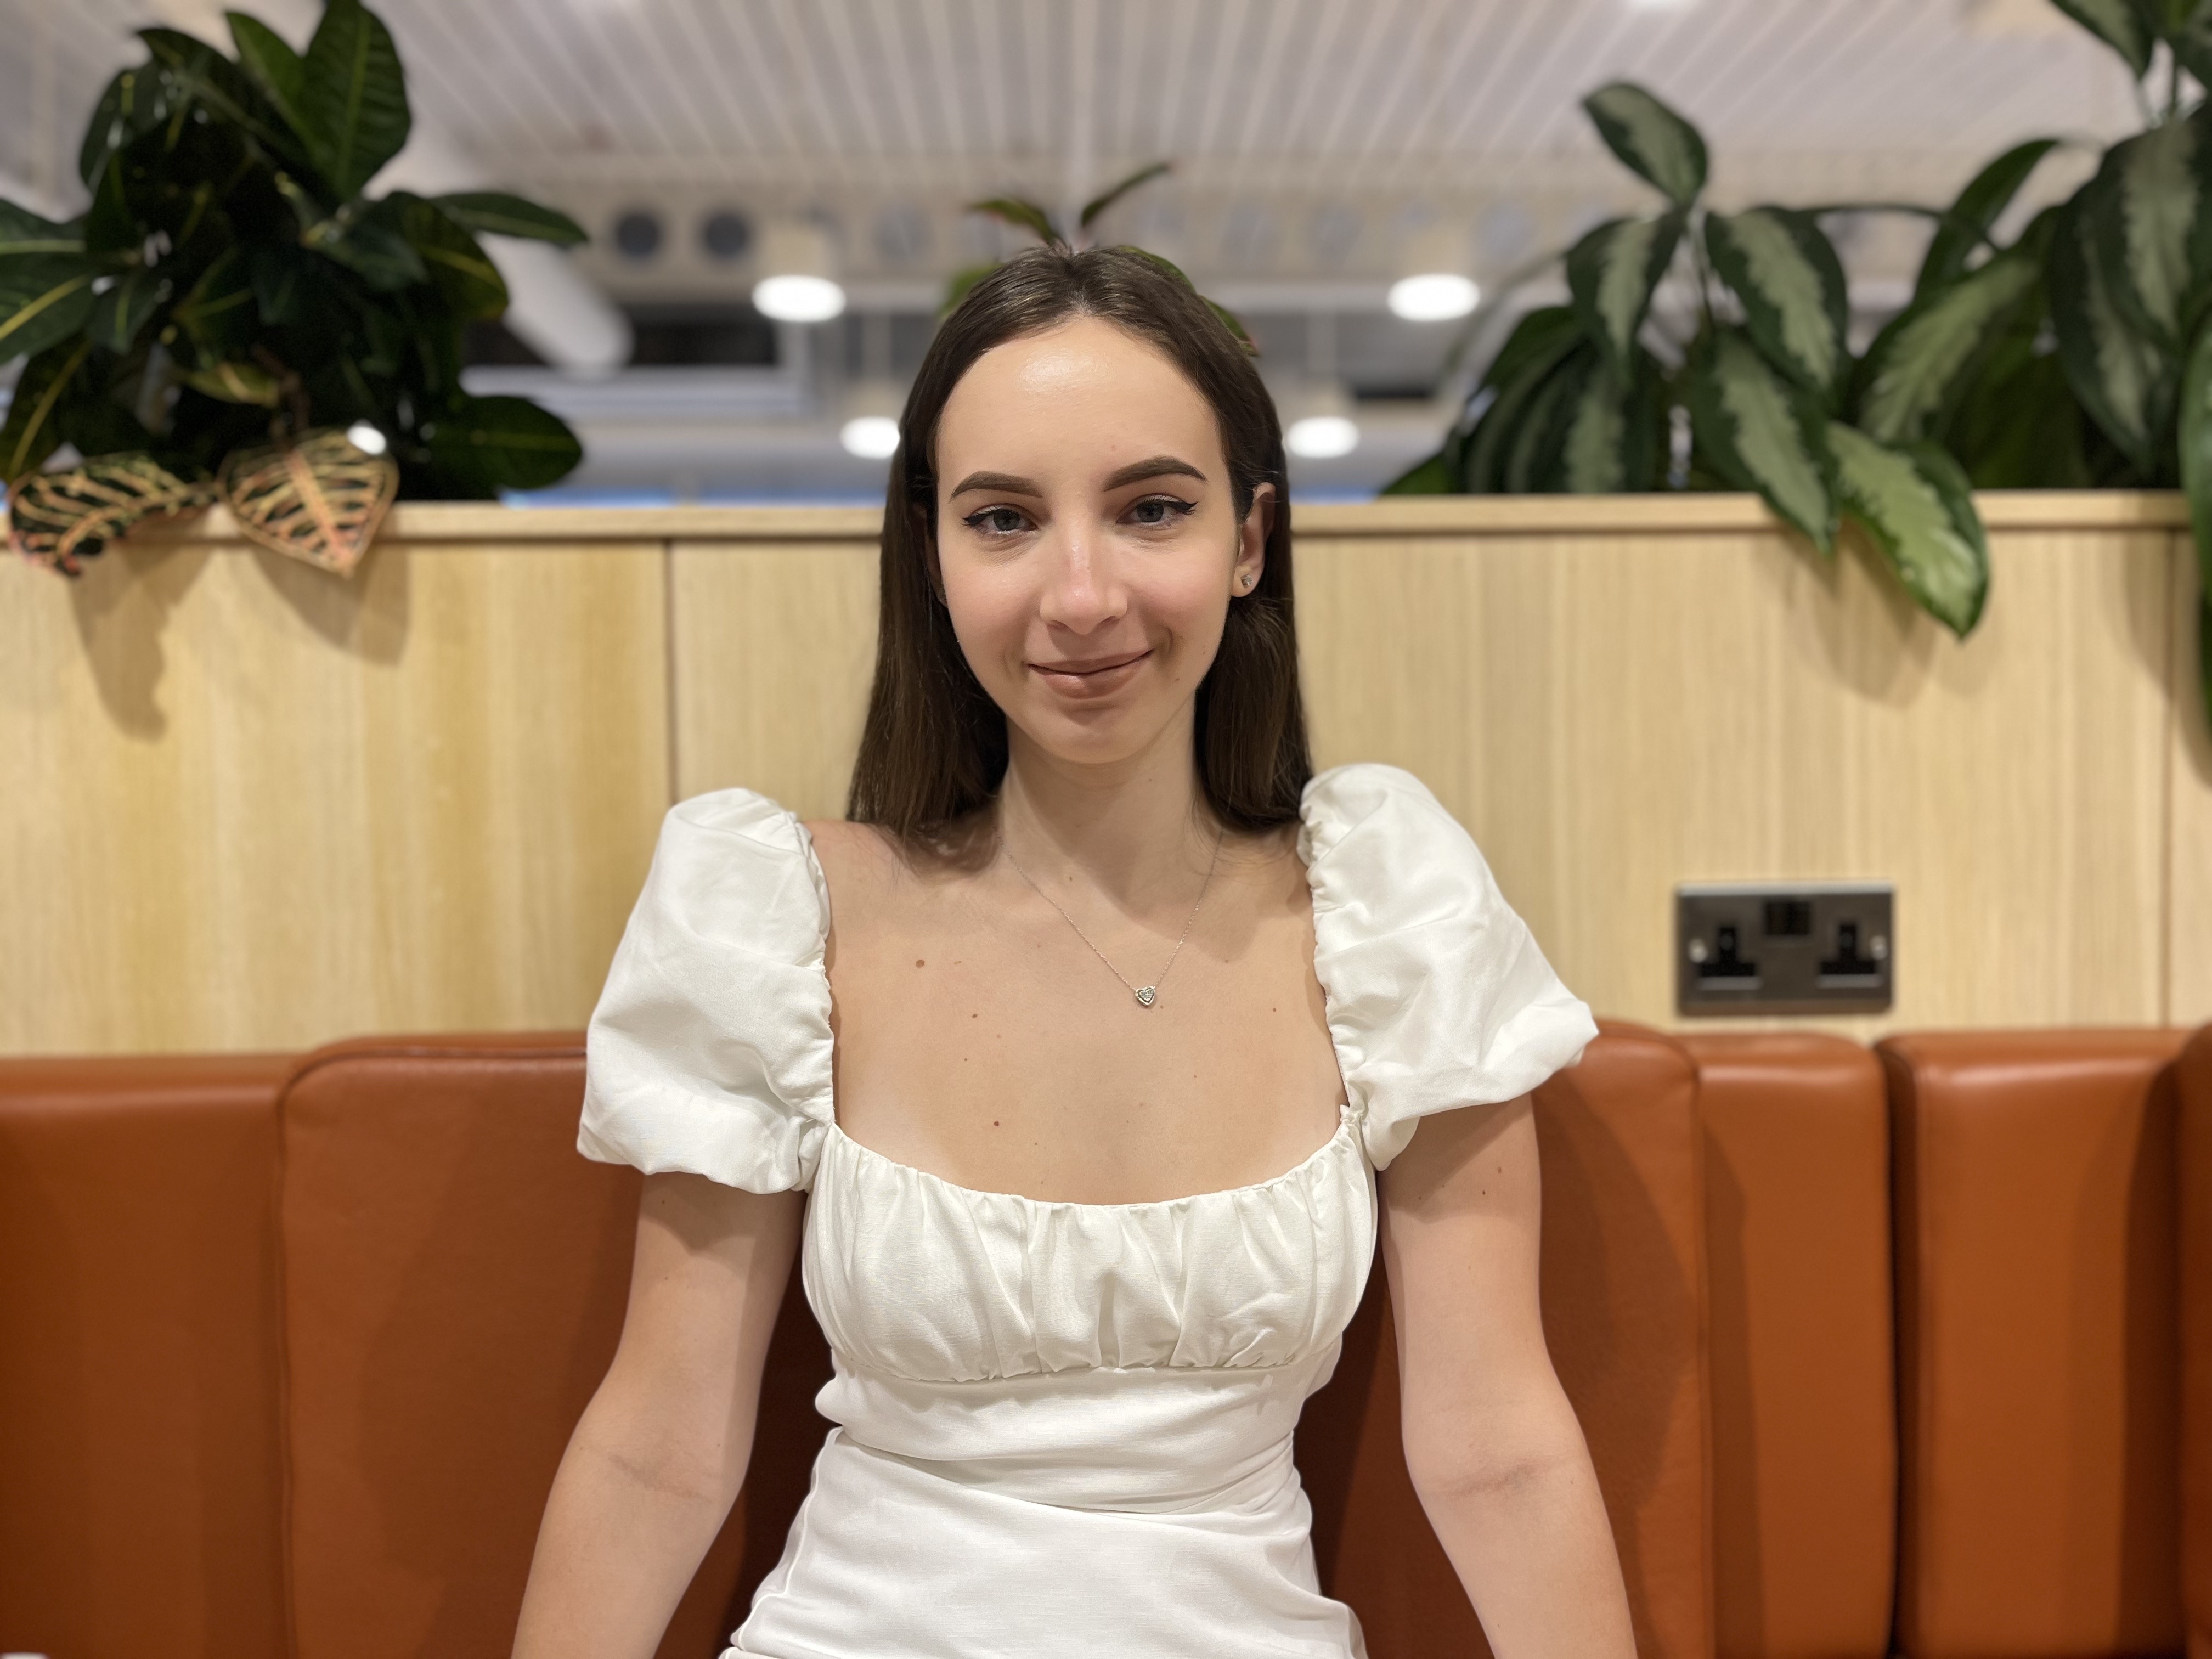 Girl wearing a white dress and sitting on a couch